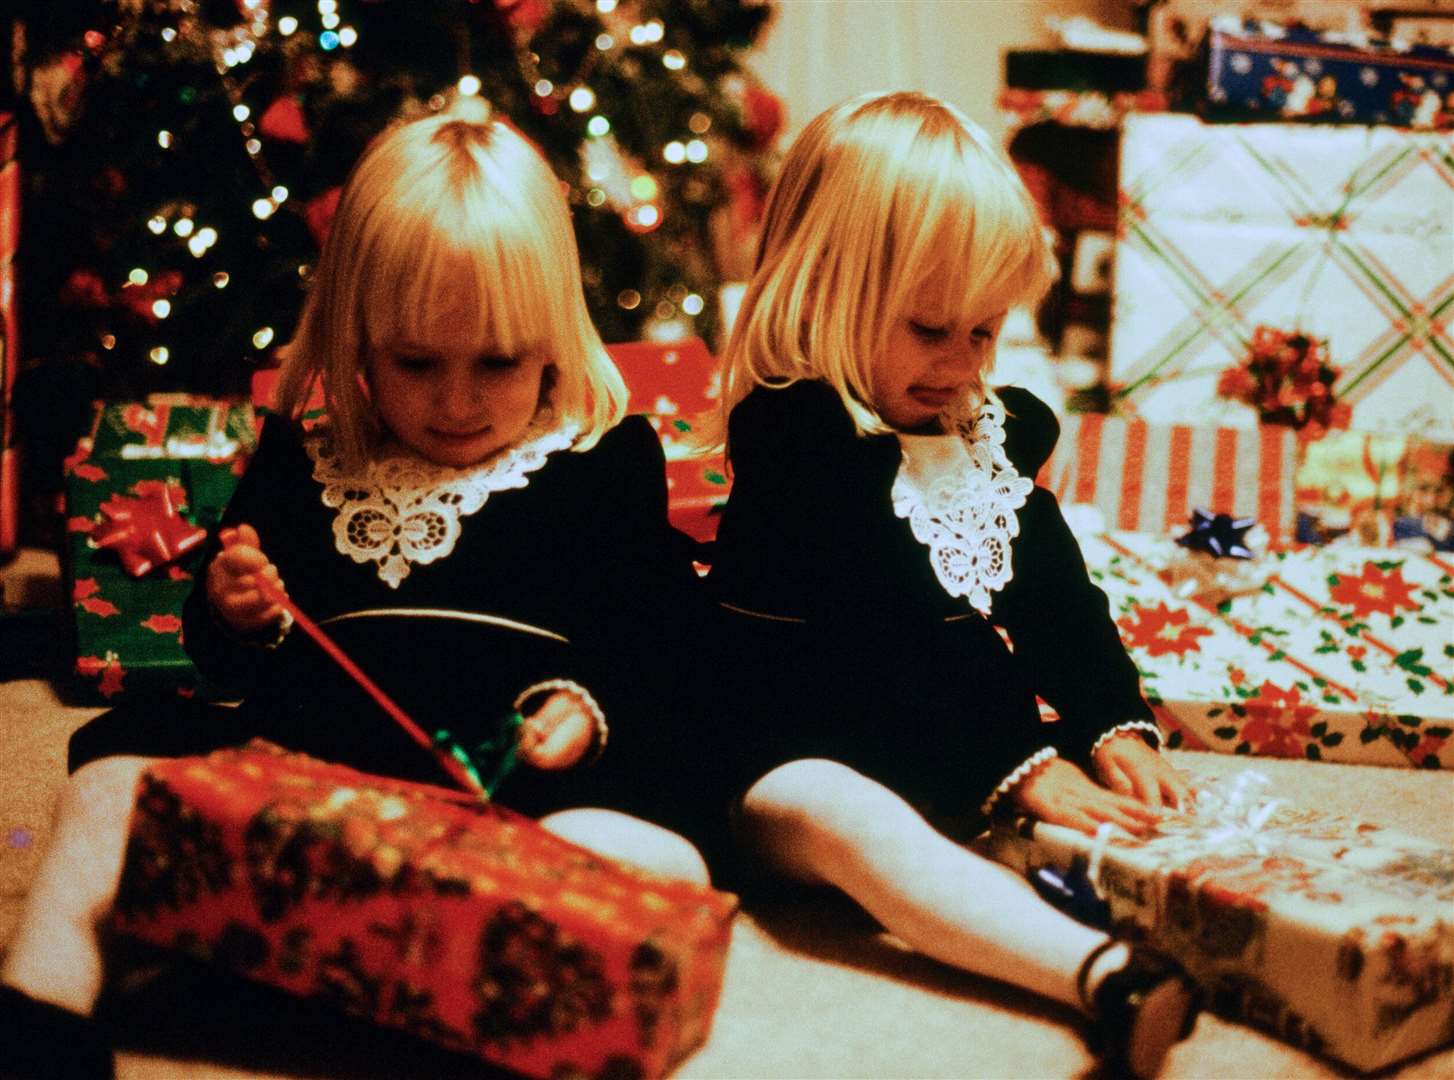 Argos has compiled a list of its most popular Christmas toys since 1973